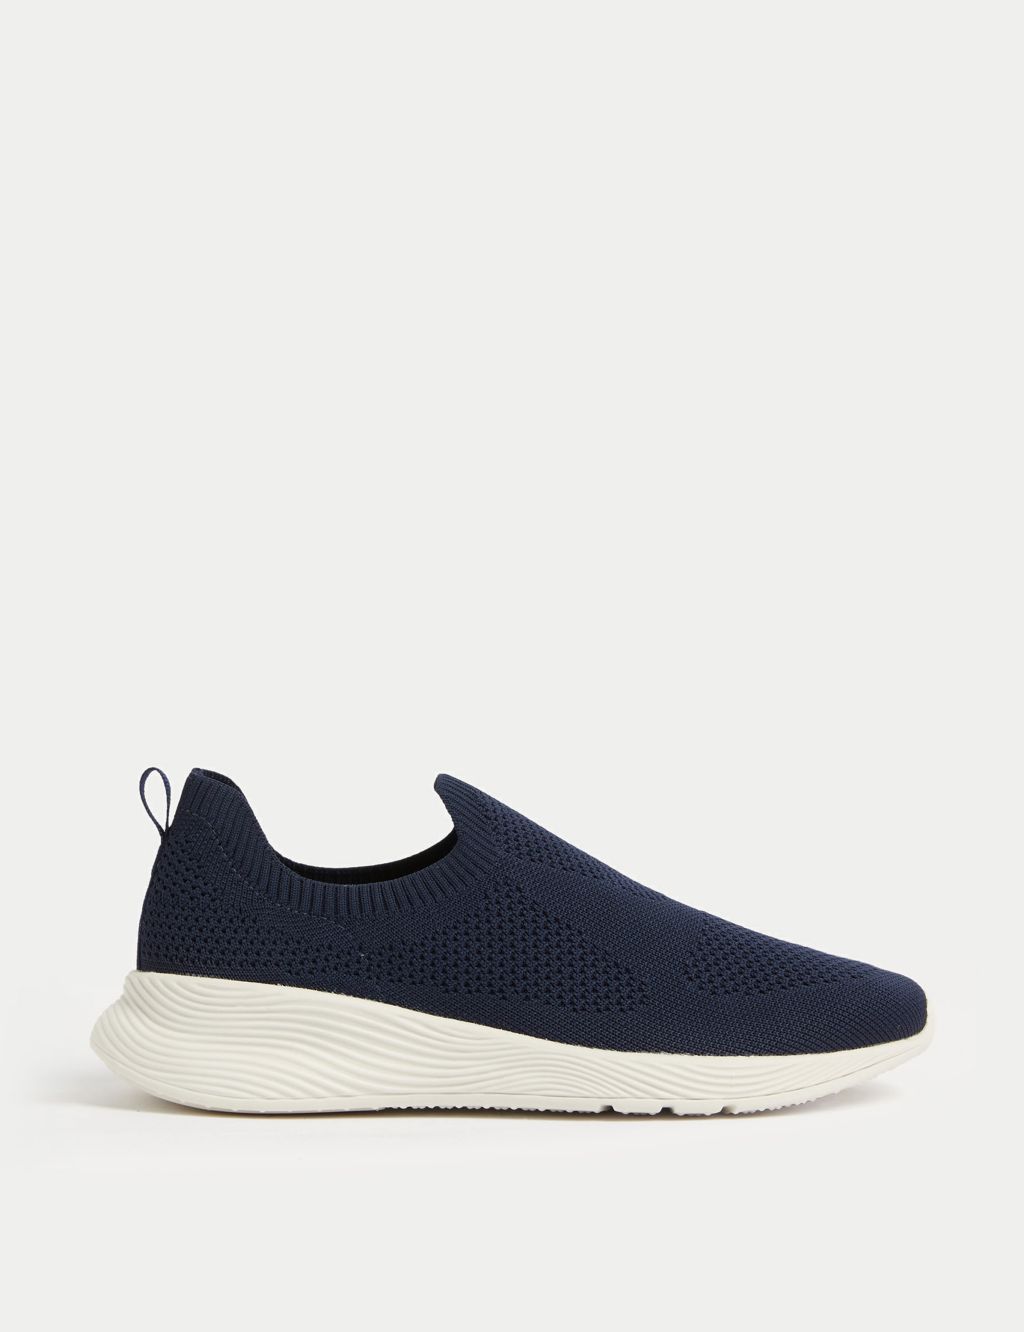 Knitted Slip On Trainers image 1